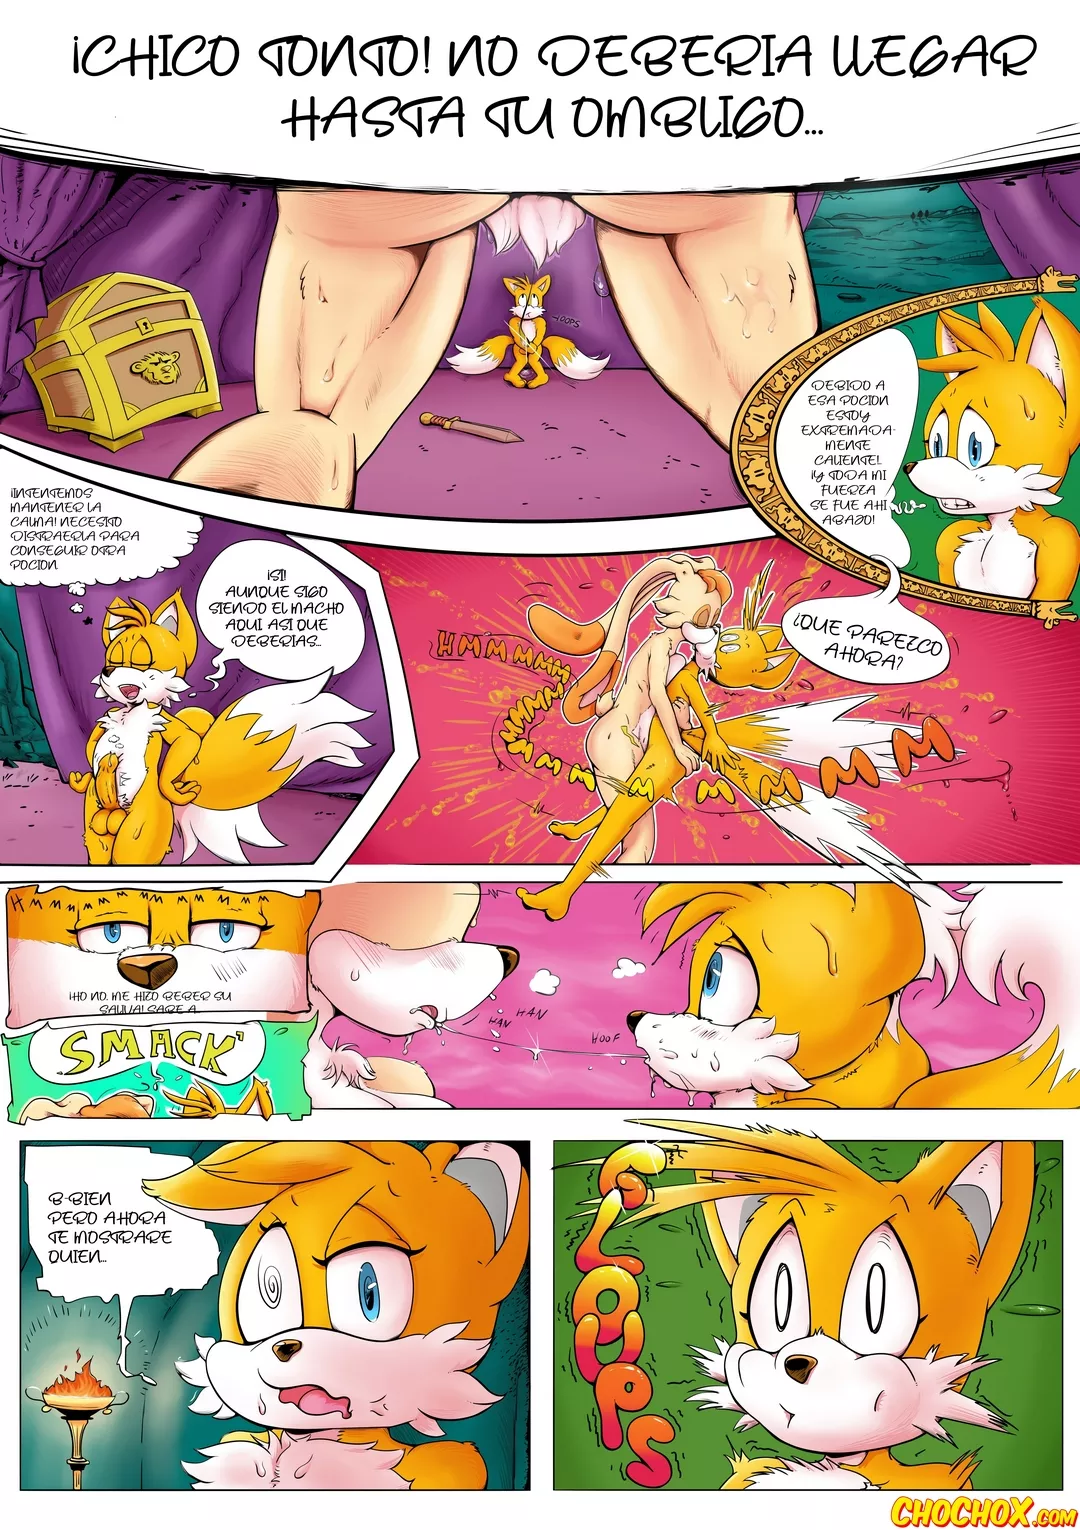 Vanilla Kidnap 2 Tails Pays The Price Lecerf 07